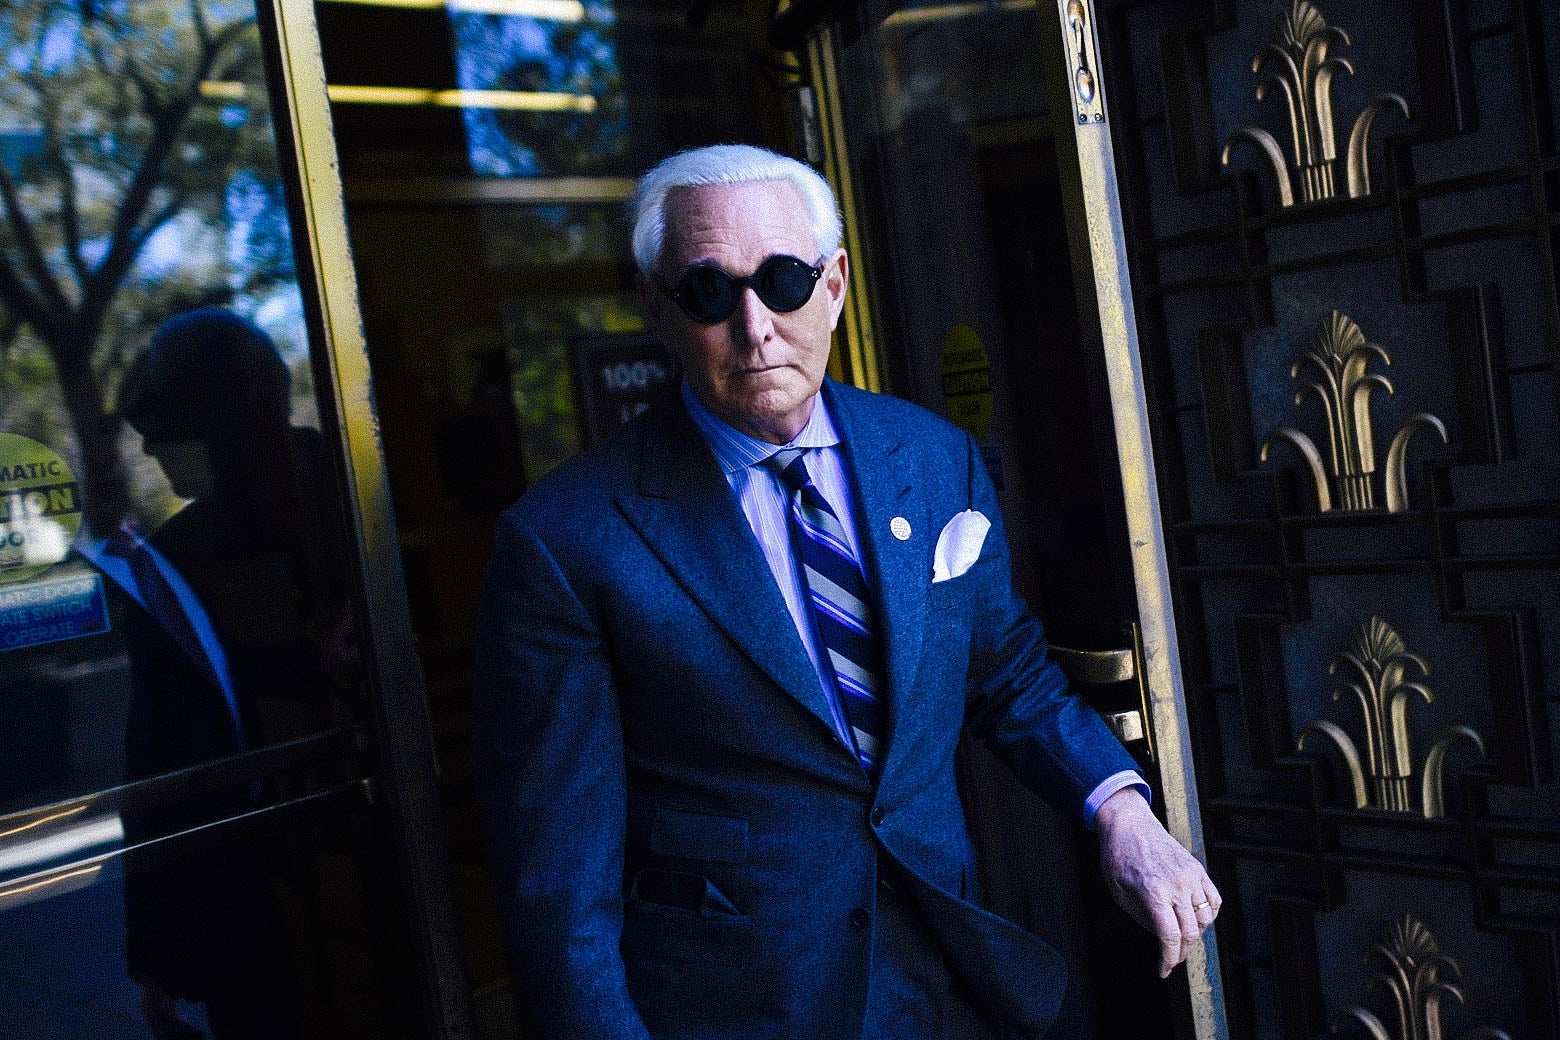 Roger Stone in sunglasses, leaving a courthouse.